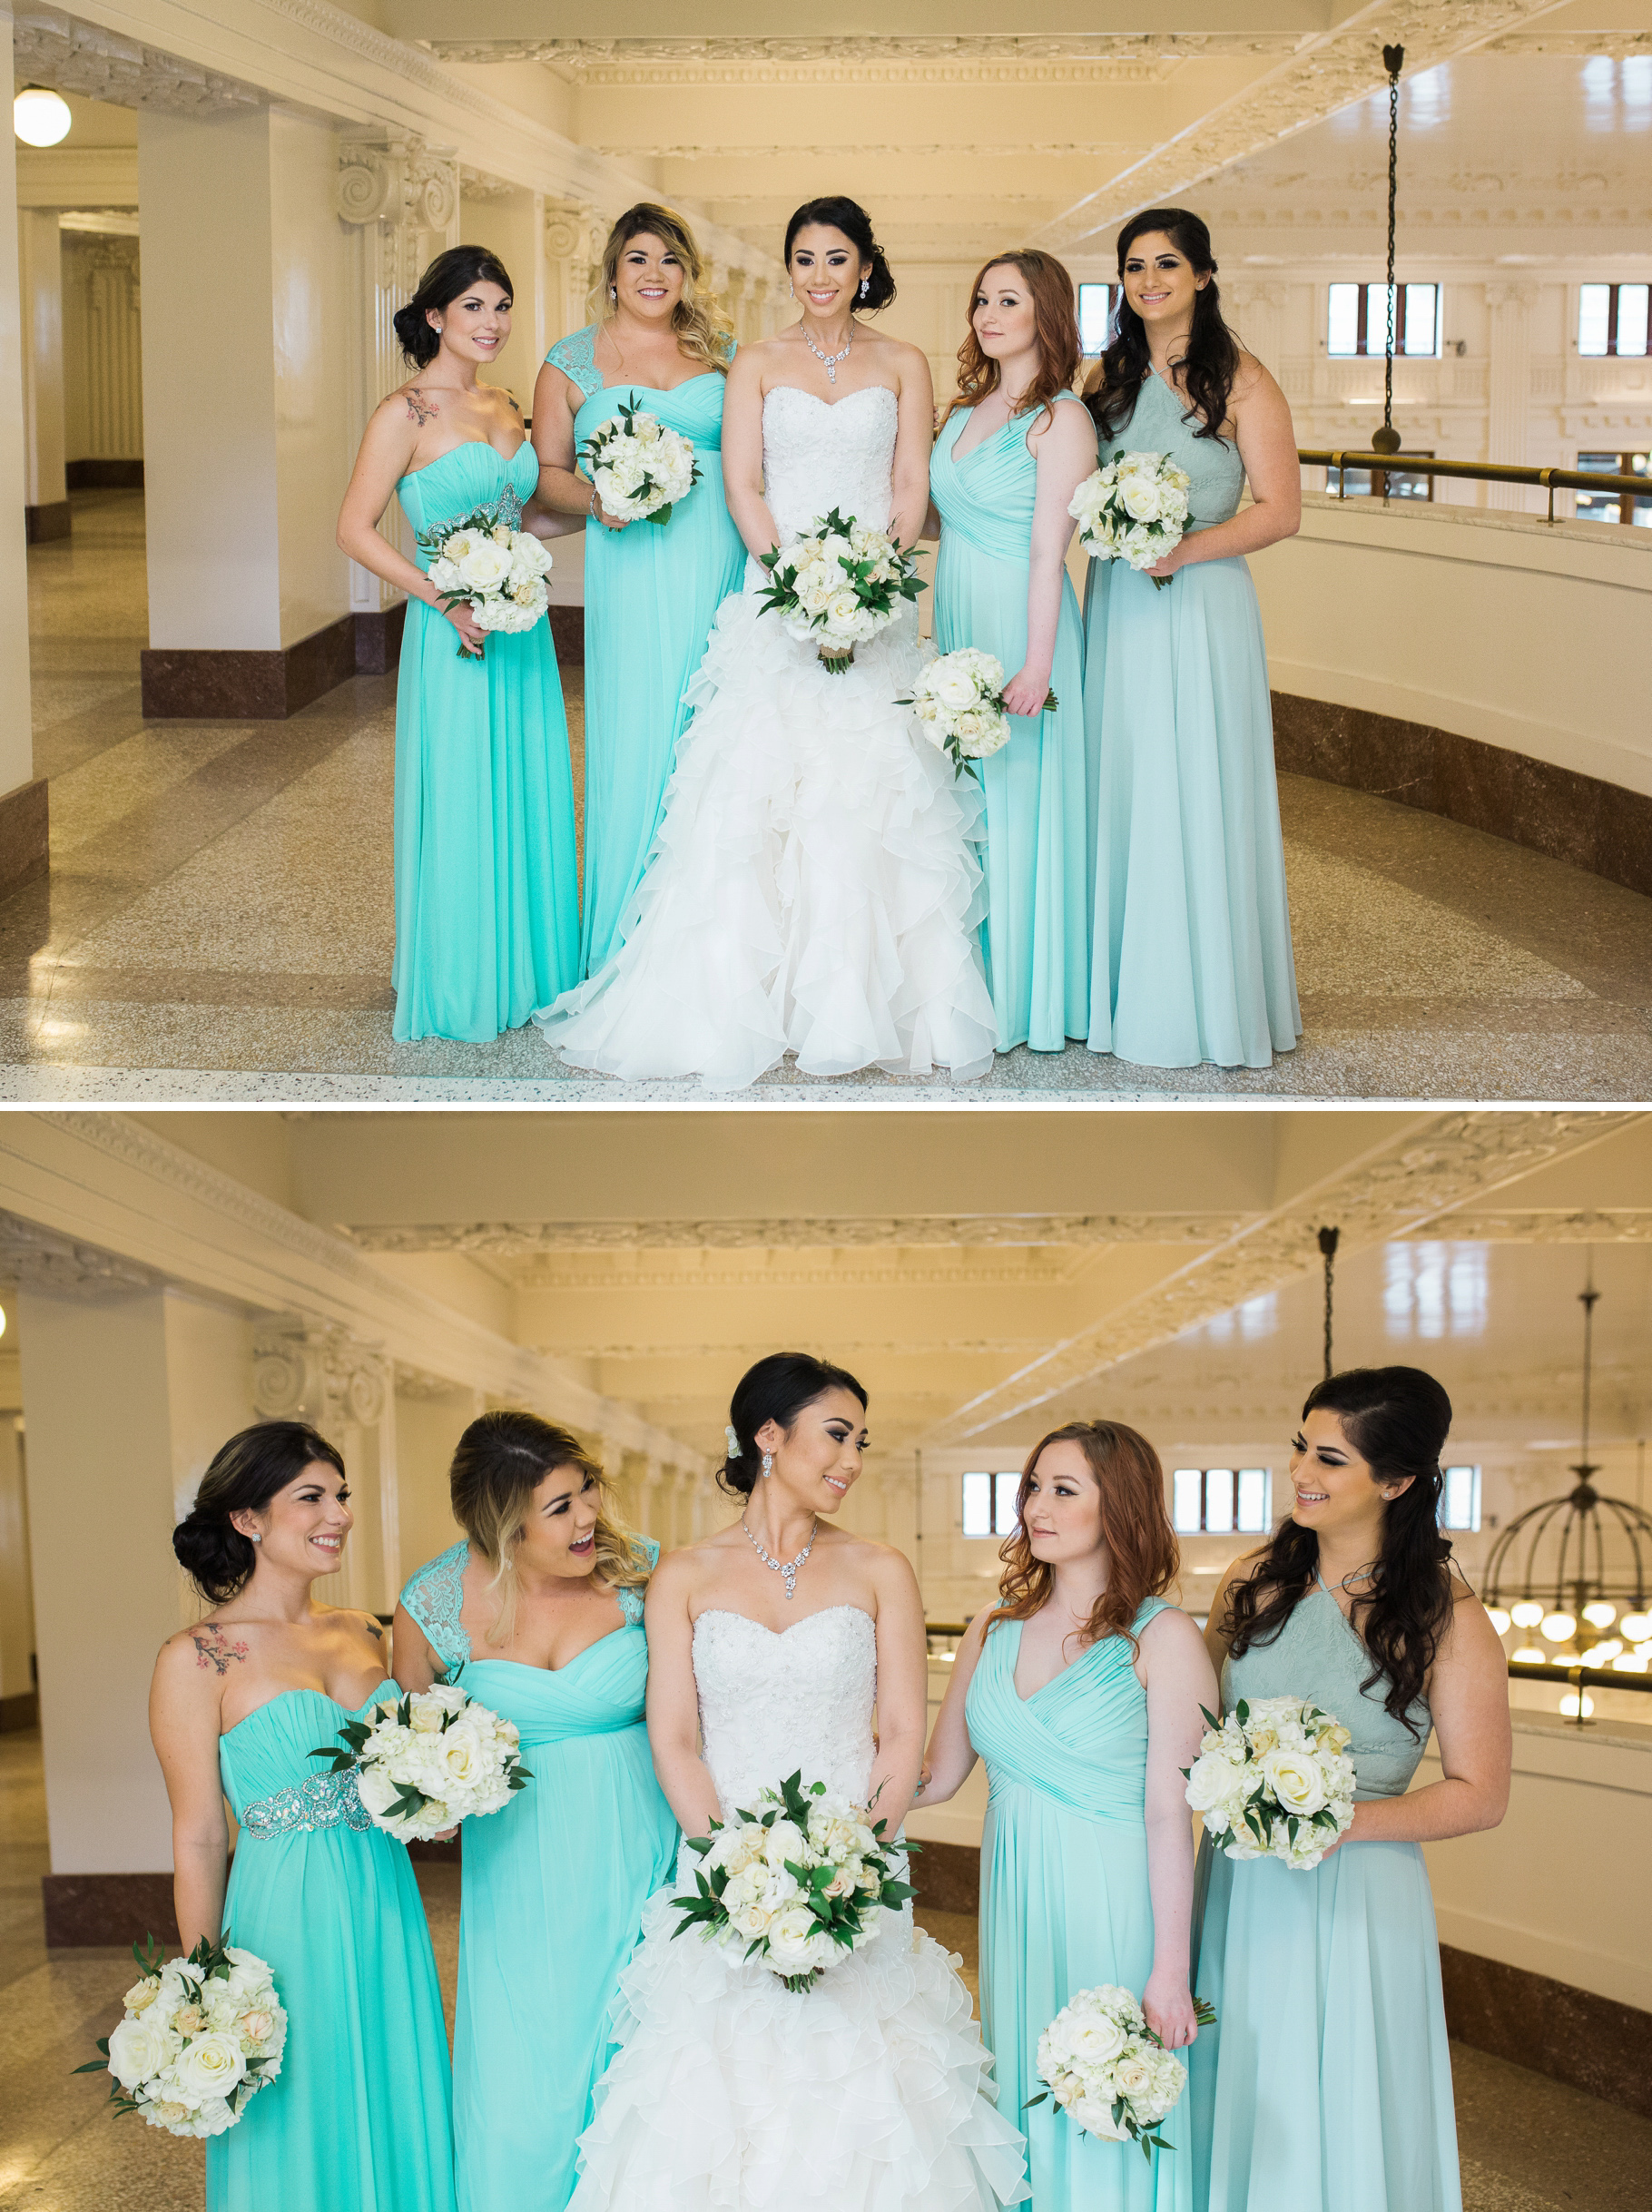 15-King-Street-Station-Pioneer-Square-bridesmaids-portraits-Pacific-Tower-Seattle-Wedding-Photographer-Photography-by-Betty-Elaine